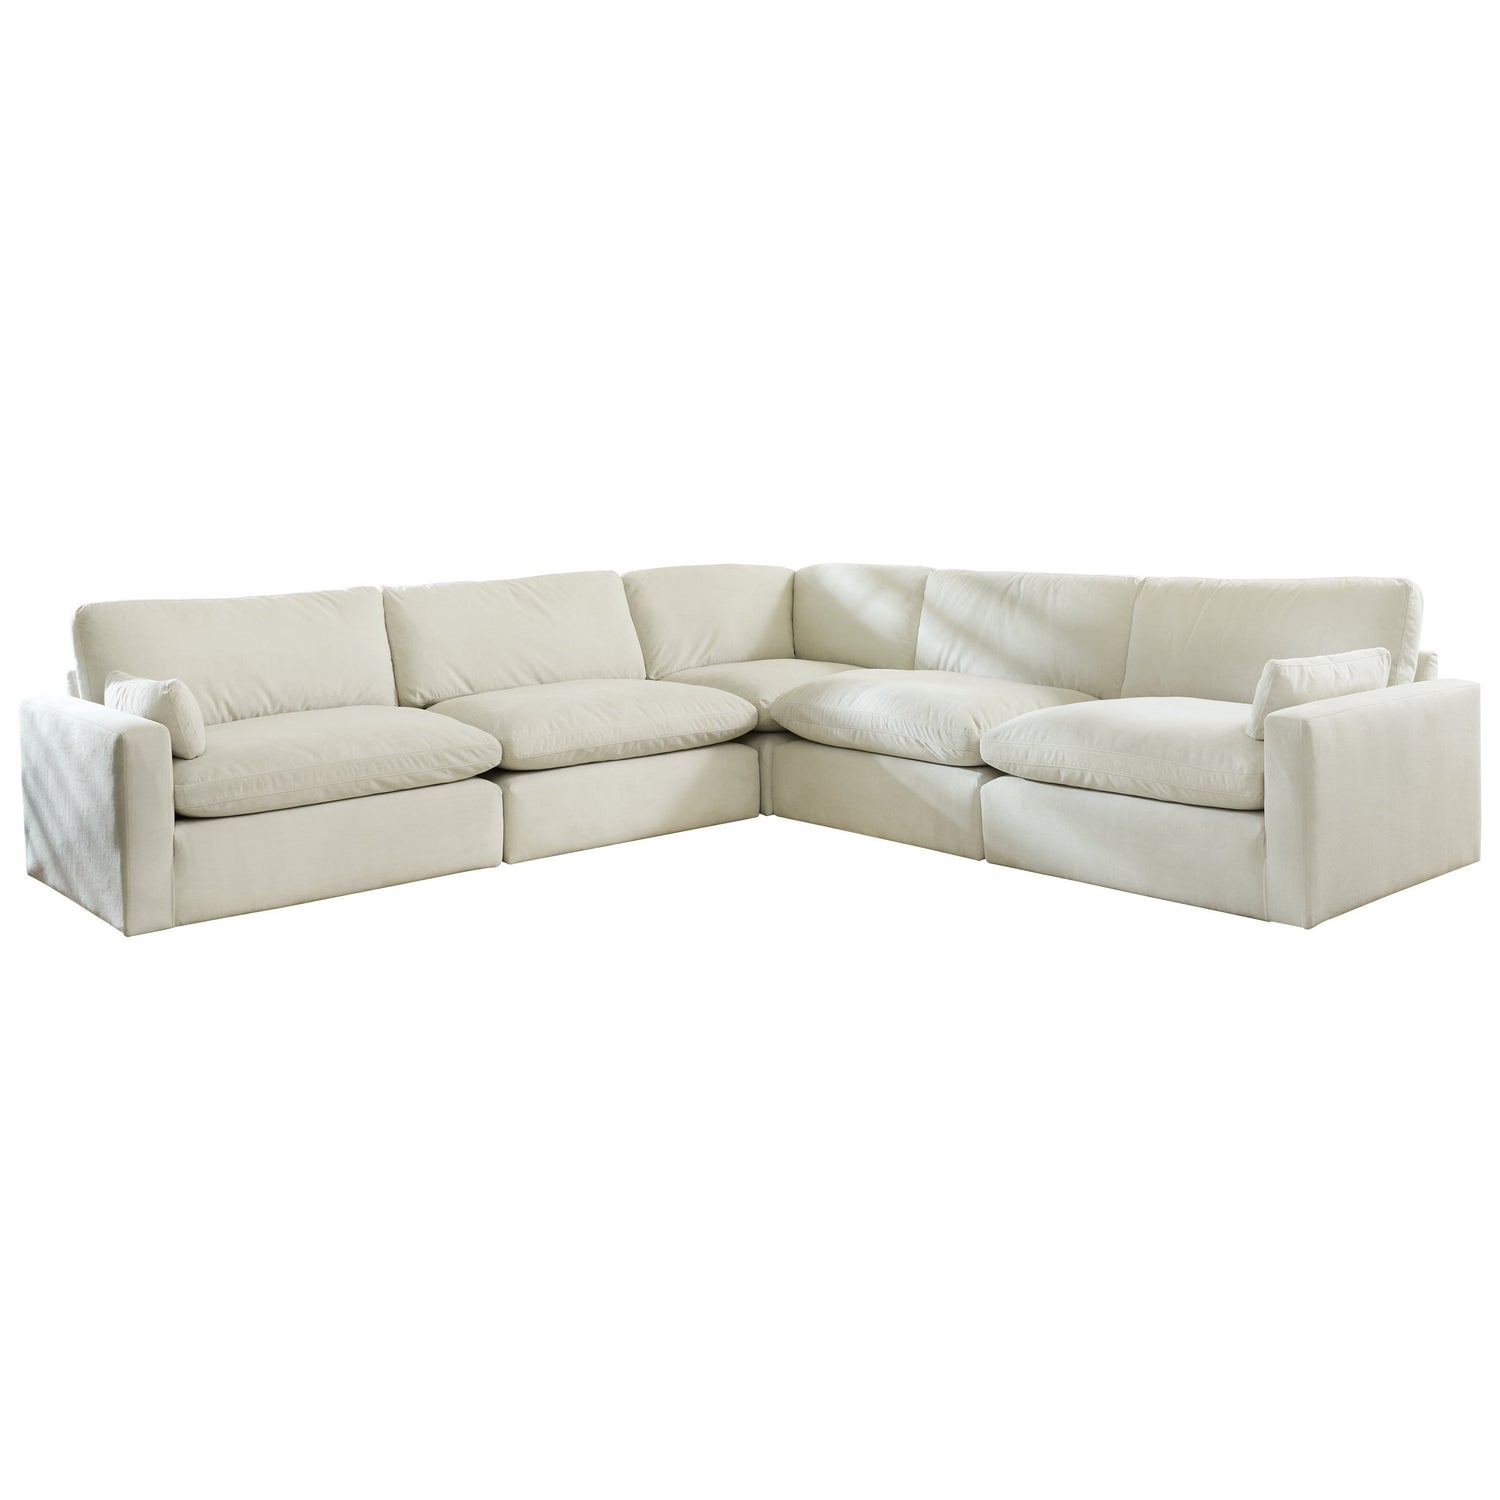 Sophie 5-Piece Sectional Ash-15704S5